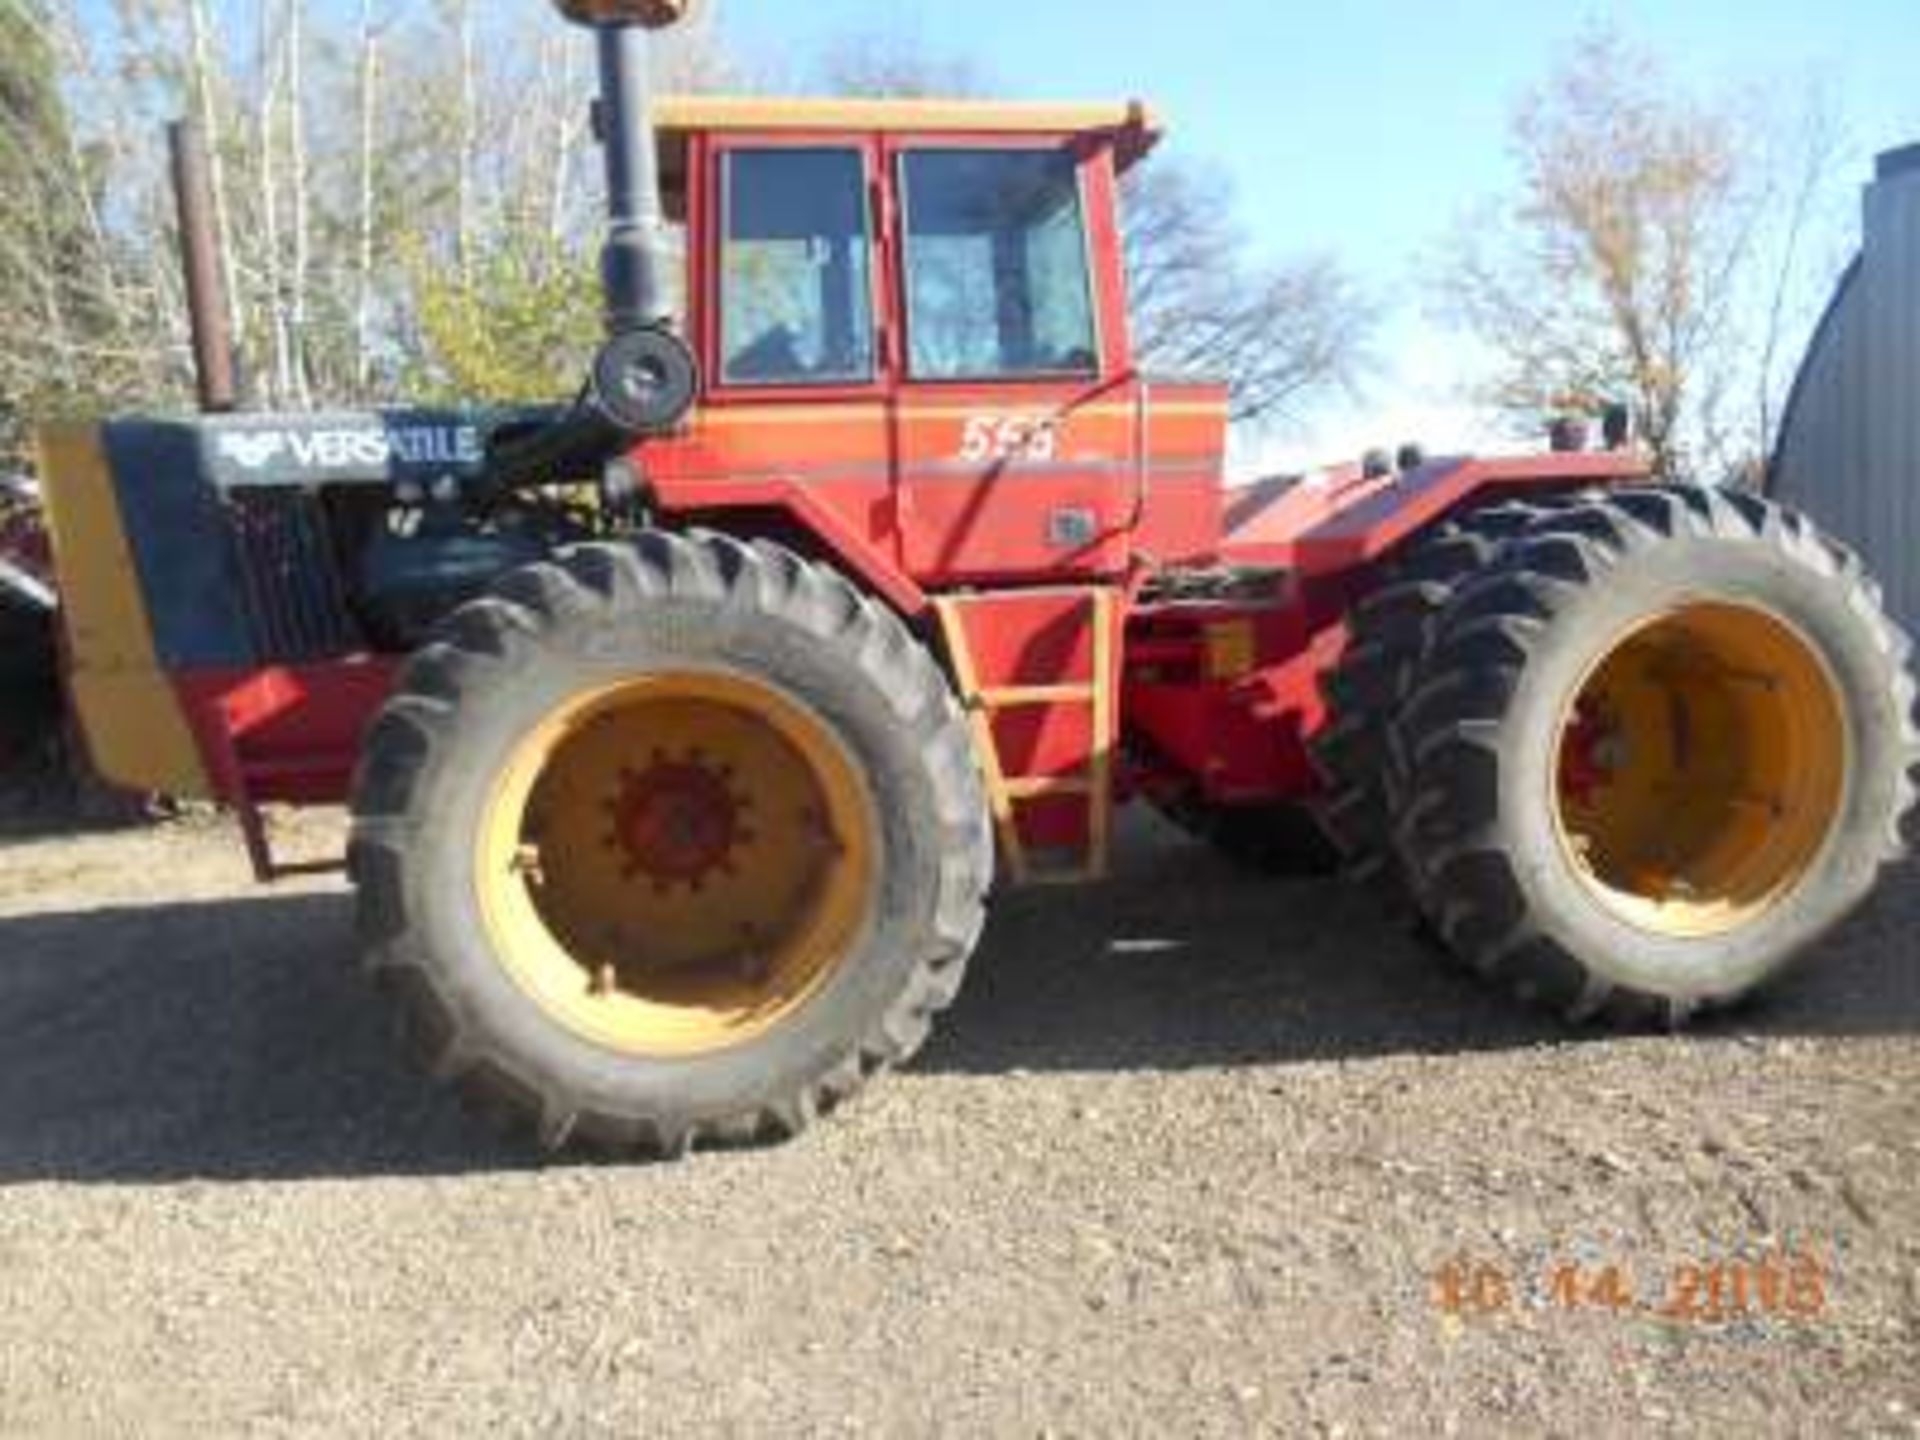 Versatile 555 4WD tractor: Cab, air, 4hyd, new inside tires, 18.4x38 duals, 6100 hours, new engine@